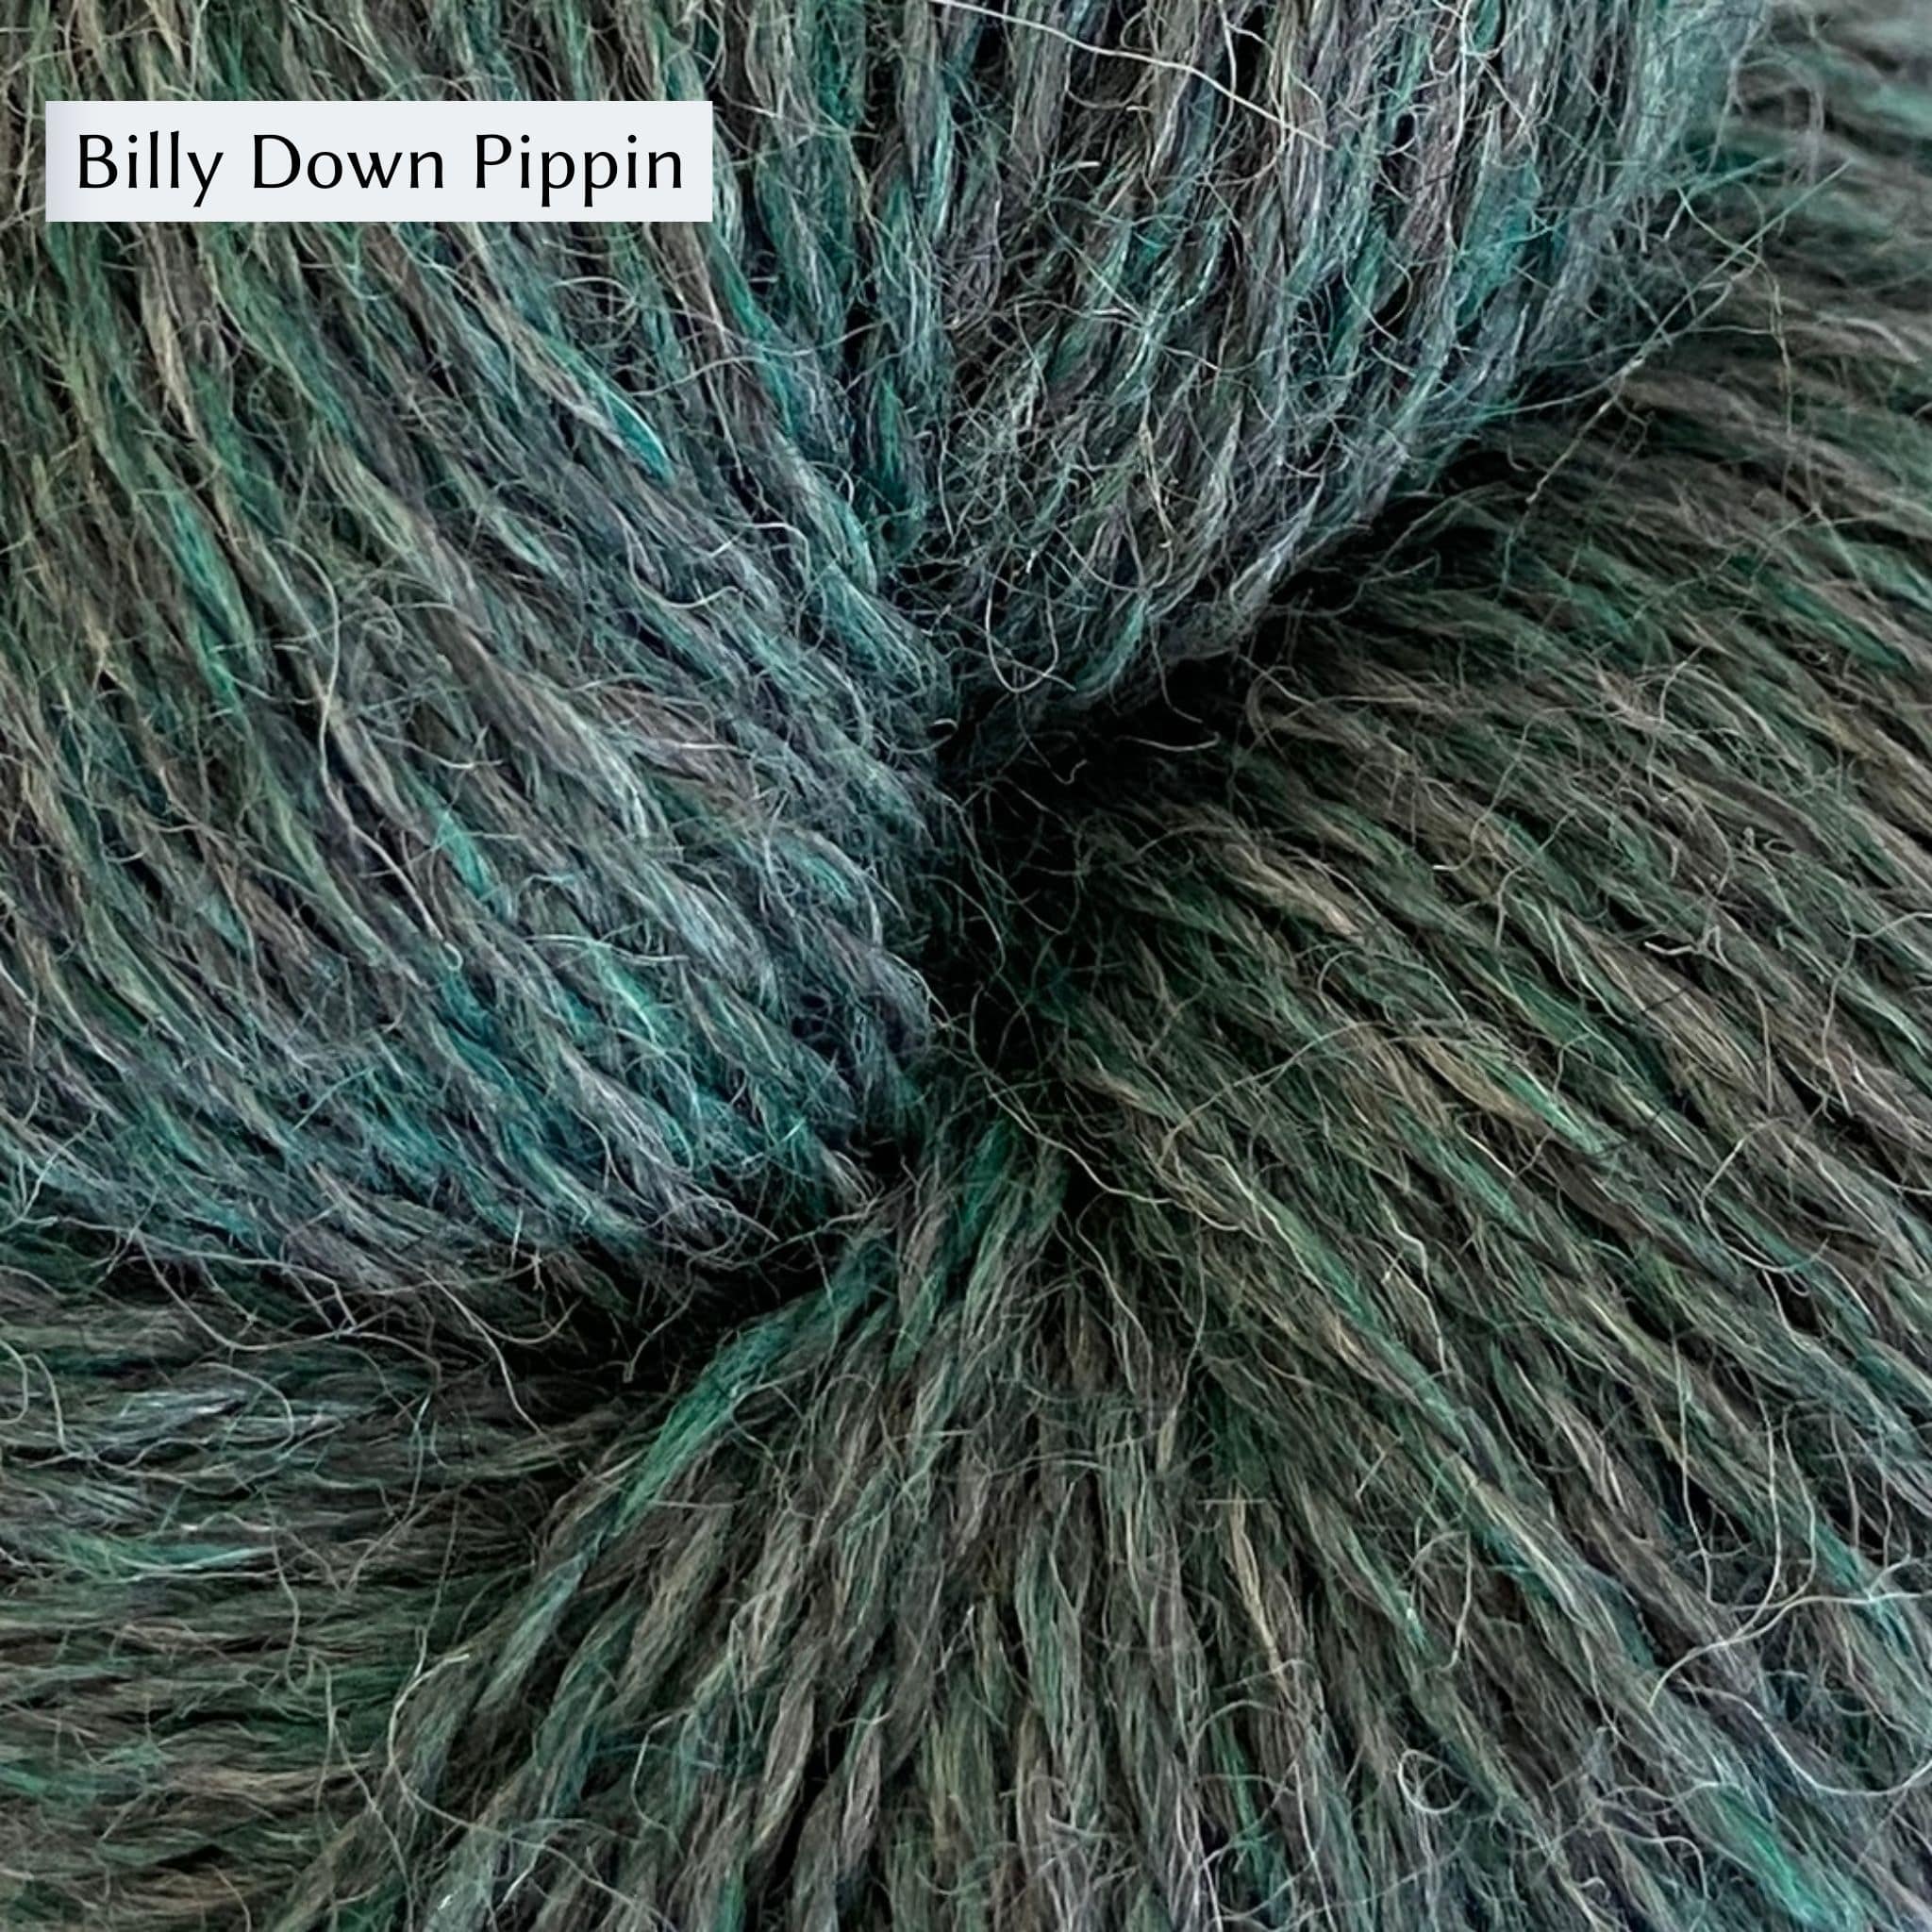 John Arbon Appledore DK, a DK weight British yarn, in color Billy Down Pippin, a cool green with grey 